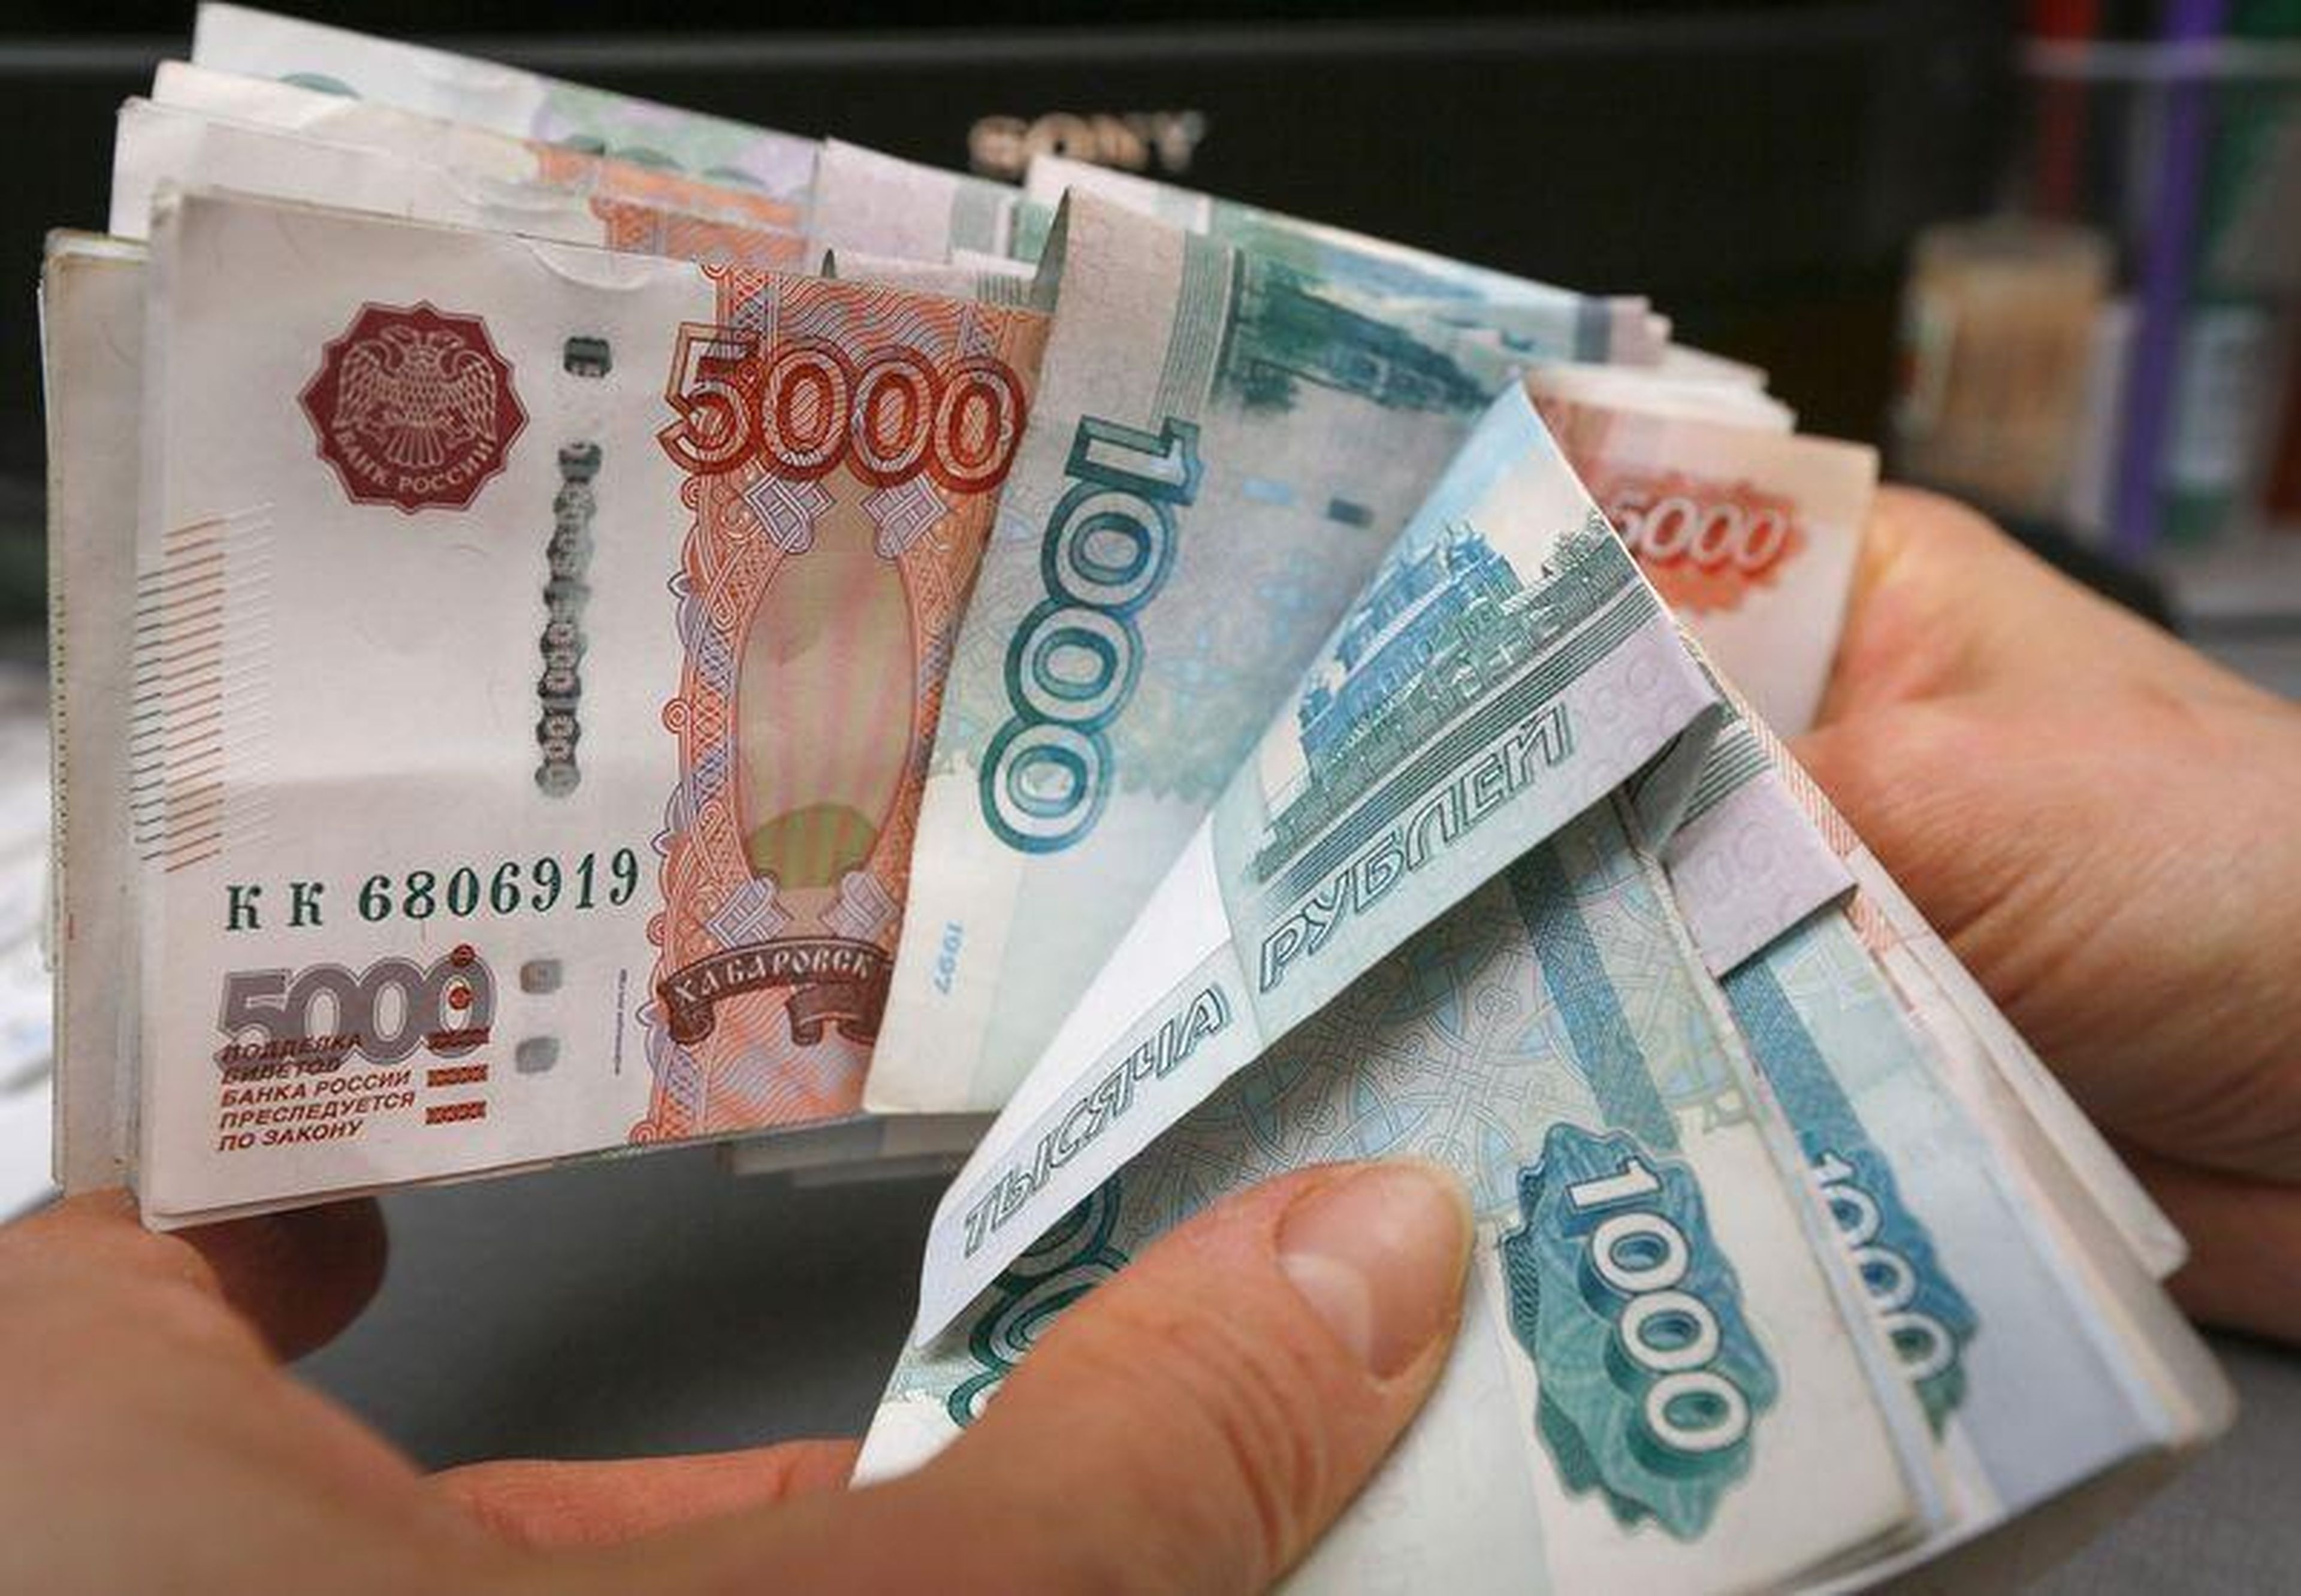 Russia's currency, the ruble, has dropped in value by 50% this decade